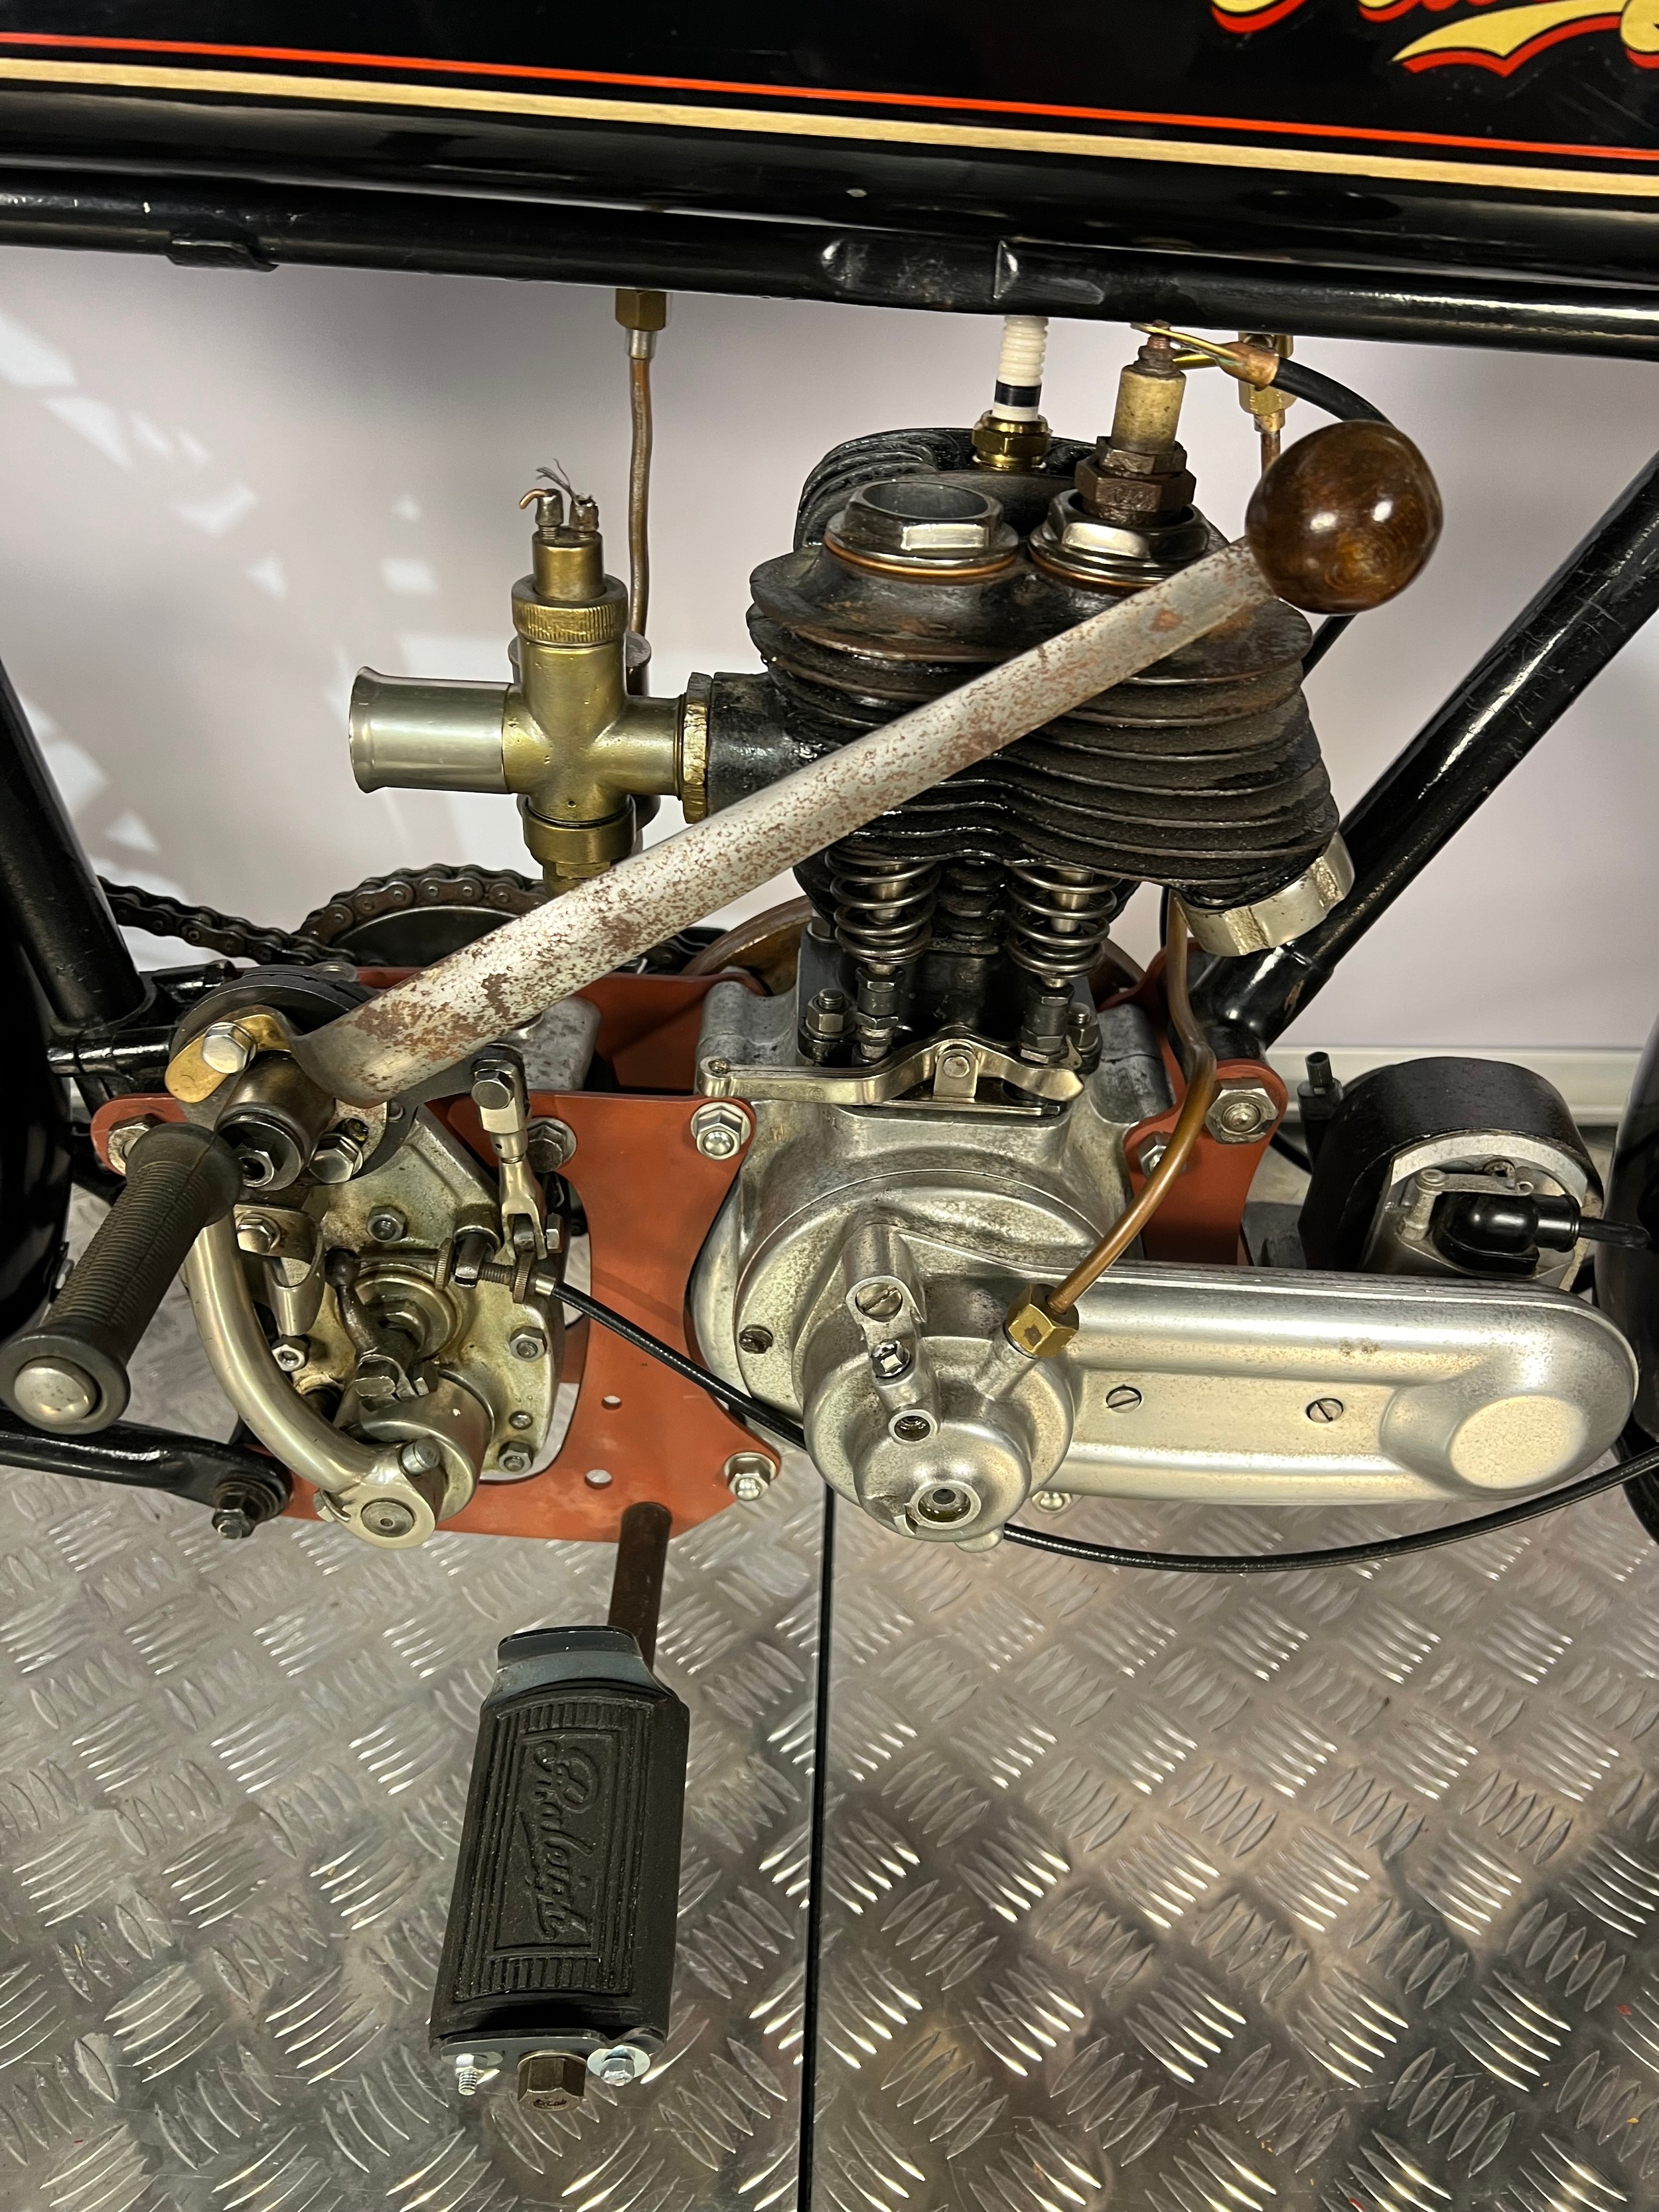 Raleigh Model 15 2¼HP motorcycle. 1924. 250cc. Frame No. 5341 Engine No. M1651 Comes with box of - Image 3 of 8